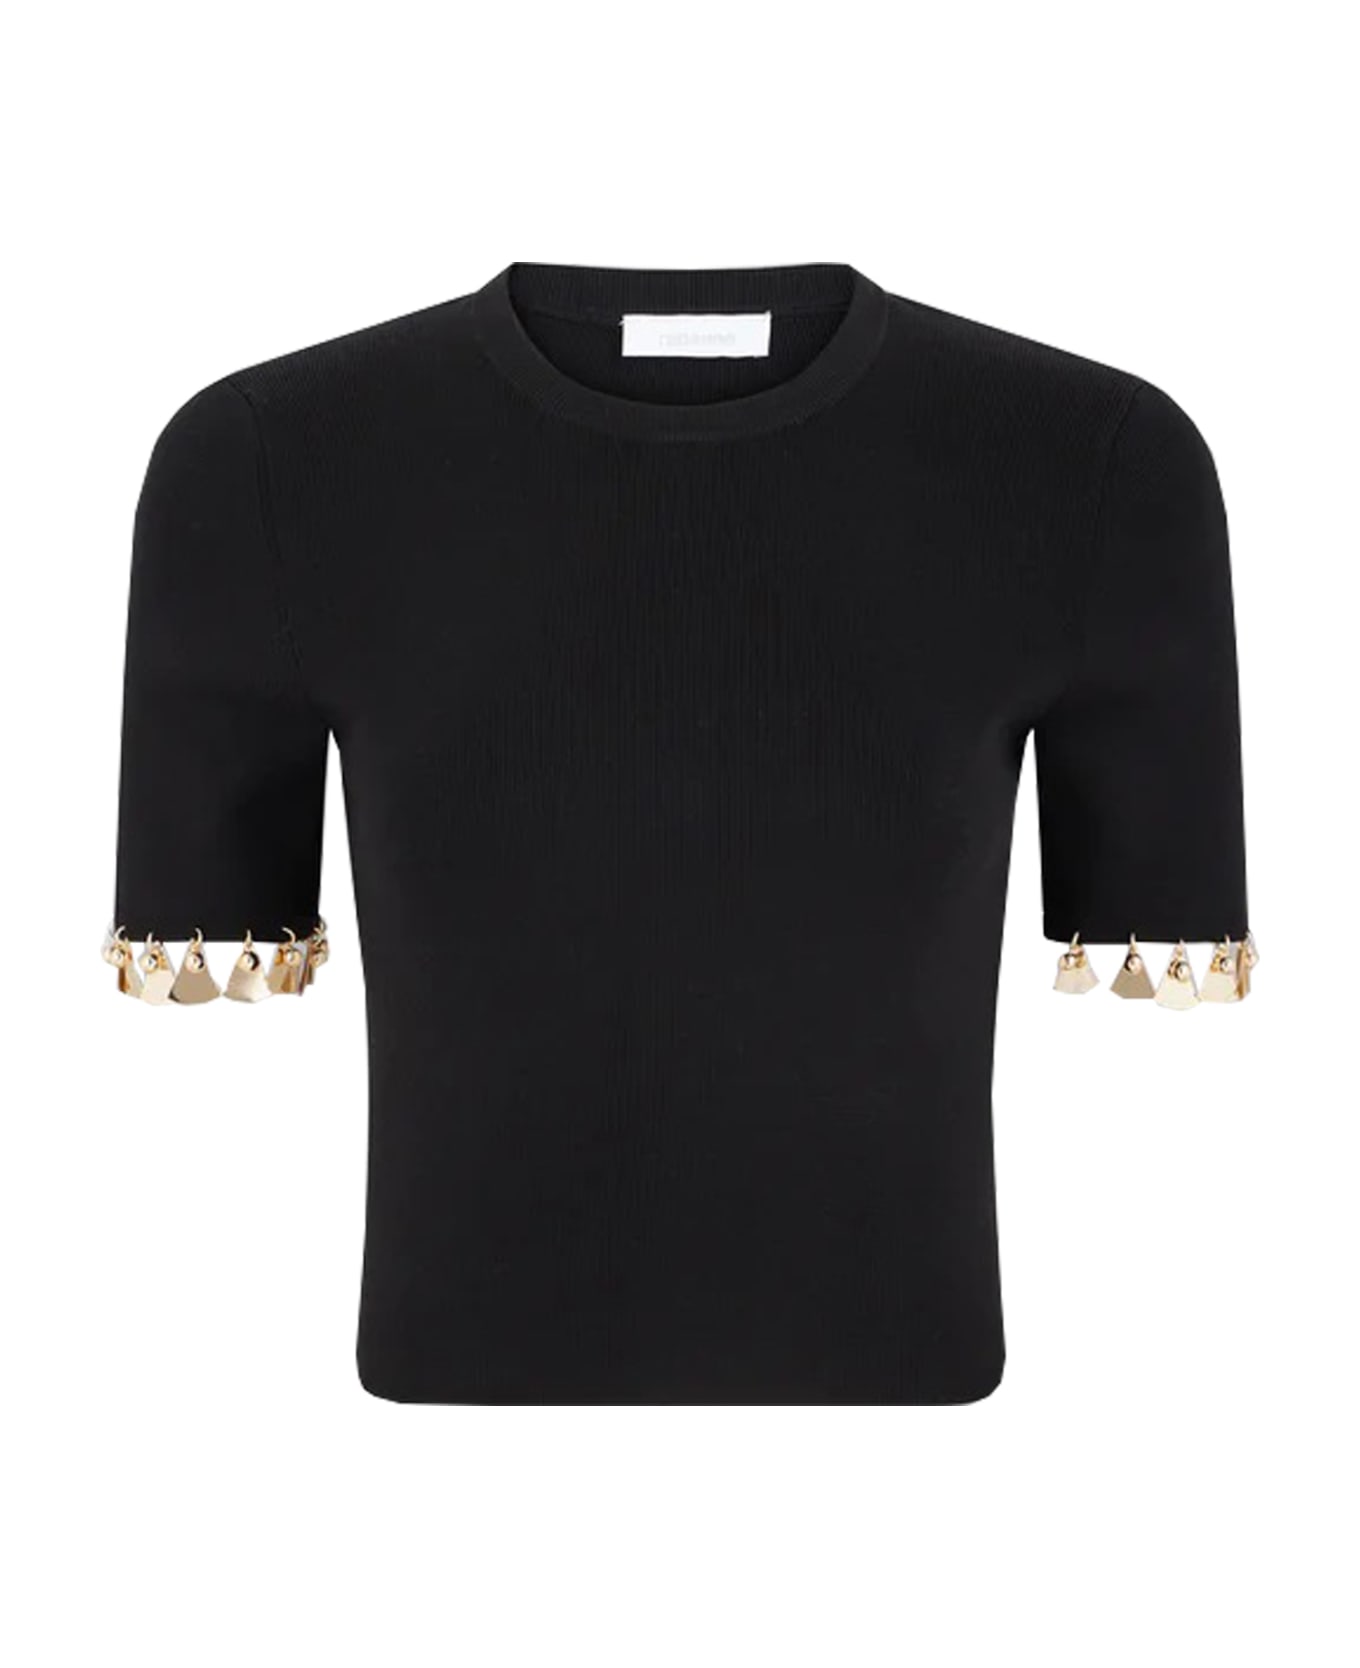 Paco Rabanne Embellished Knit Cropped Top - Black トップス